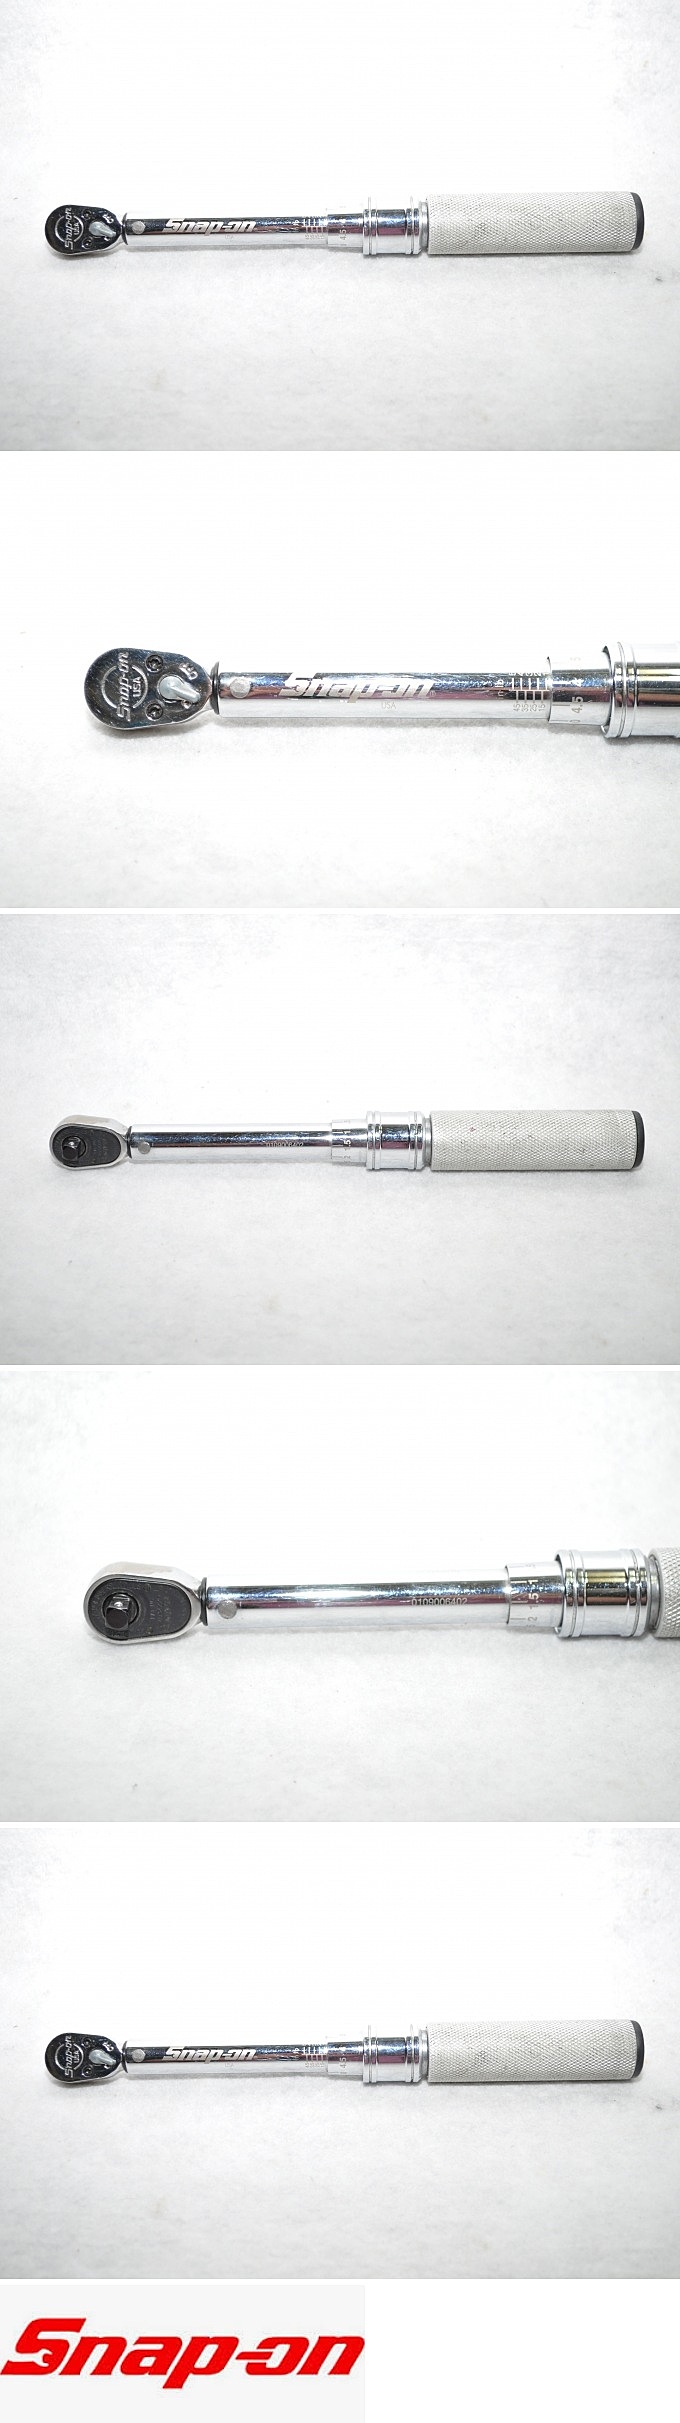 Snap-on Torque Wrench 1.jpg